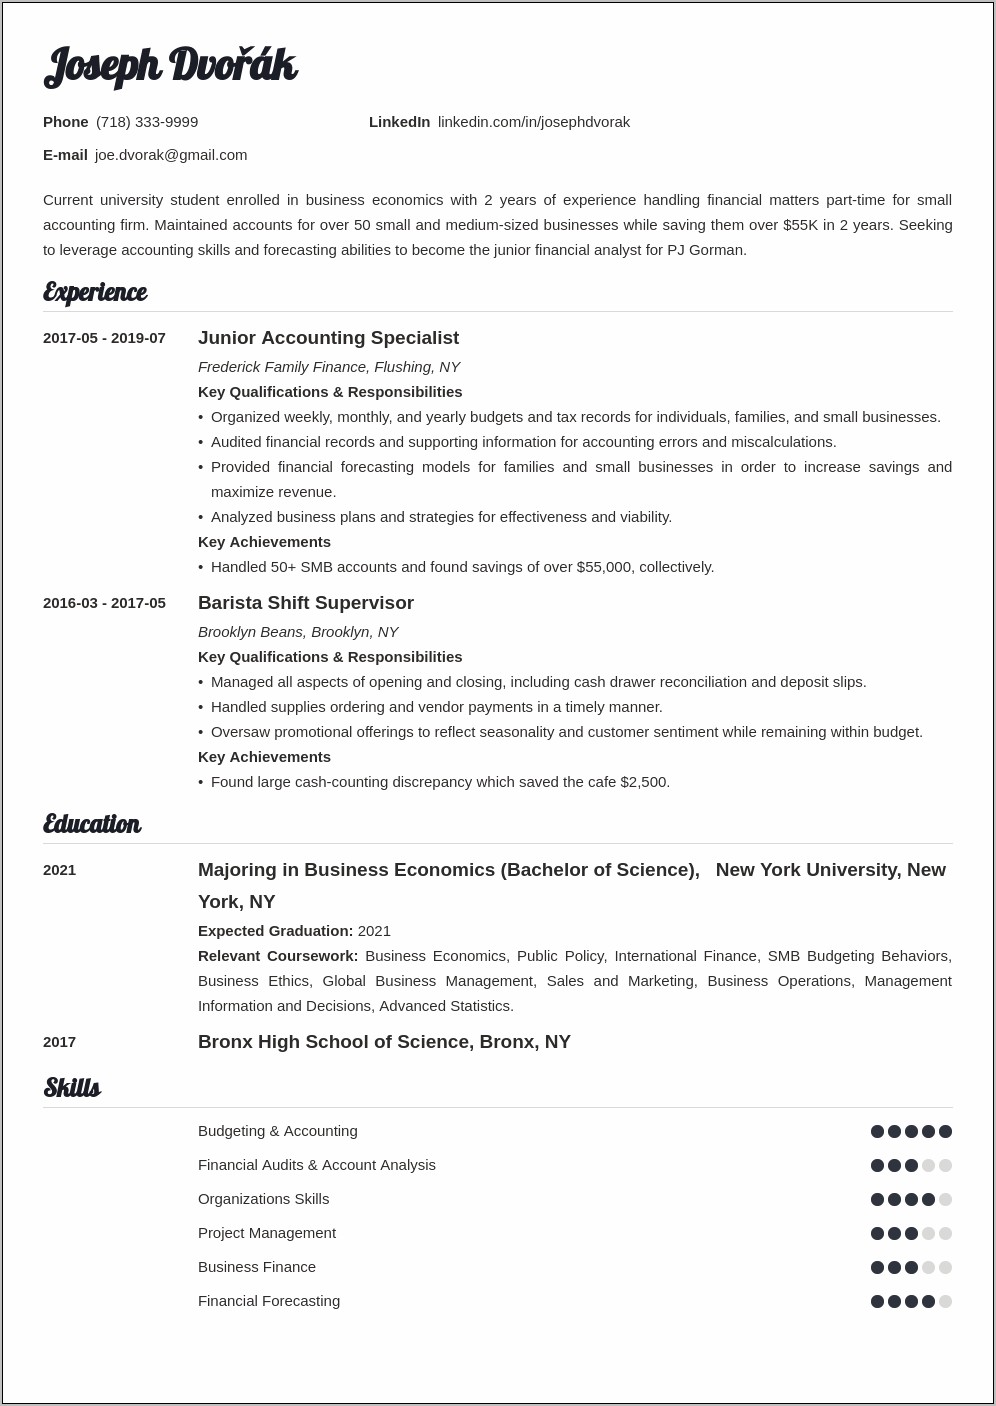 Education Summary For Resume Examples